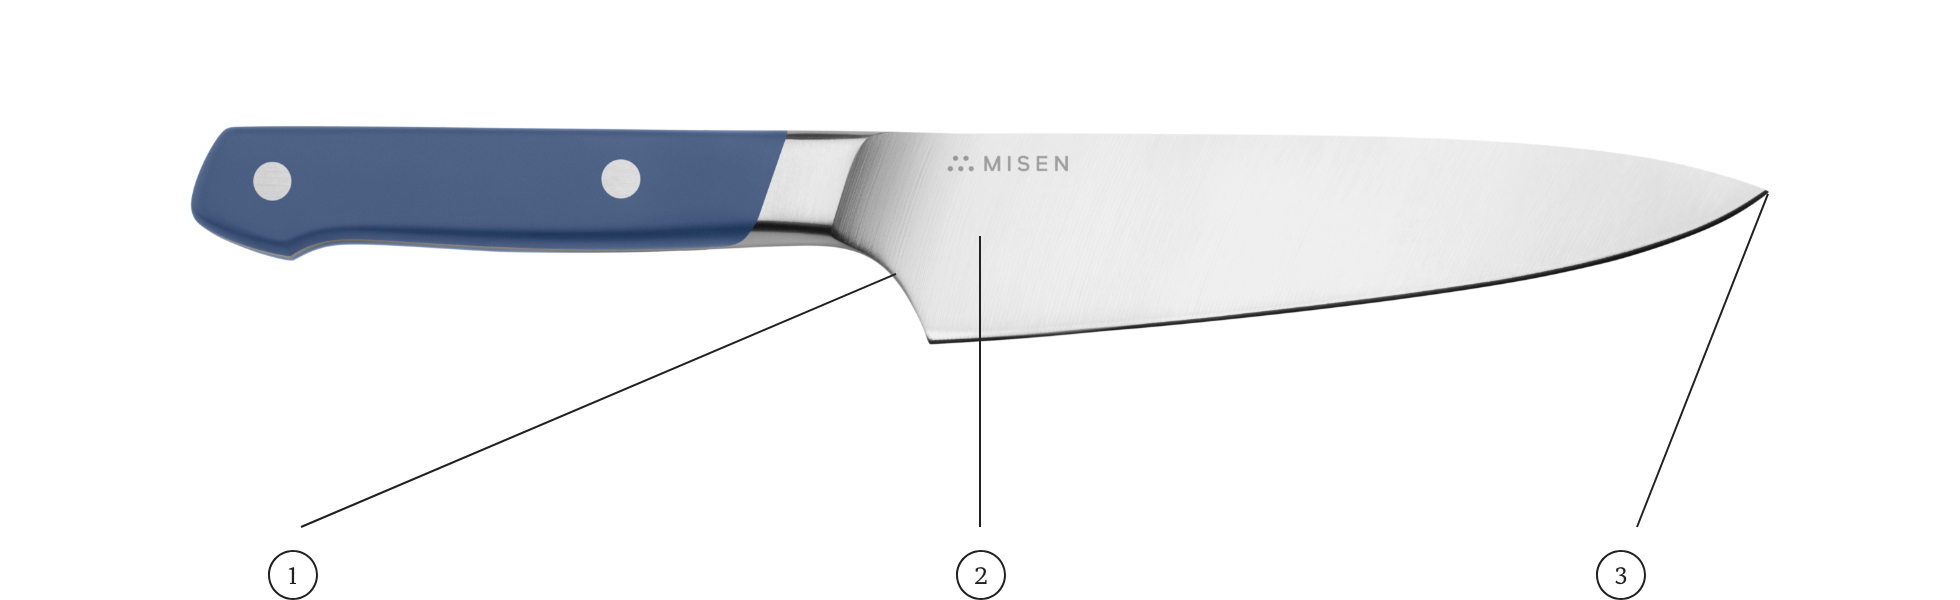 A Blue Misen Utility Knifeon a white background, with numbered indicators highlighting the sloped bolster, steel blade, and sharp edge.